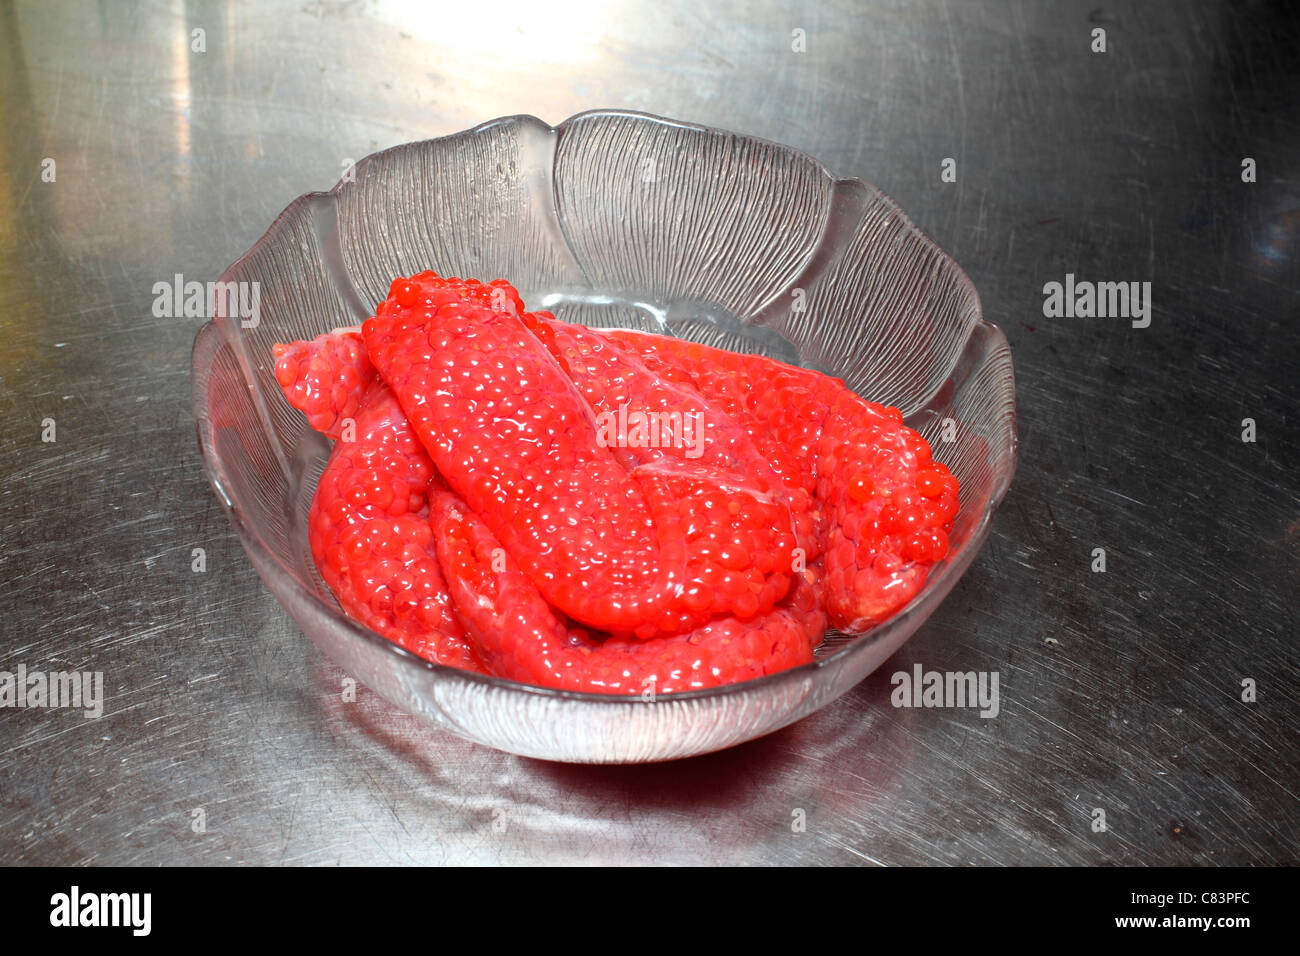 Salmon roe in a  glass bowl on a stainless steel counter Stock Photo